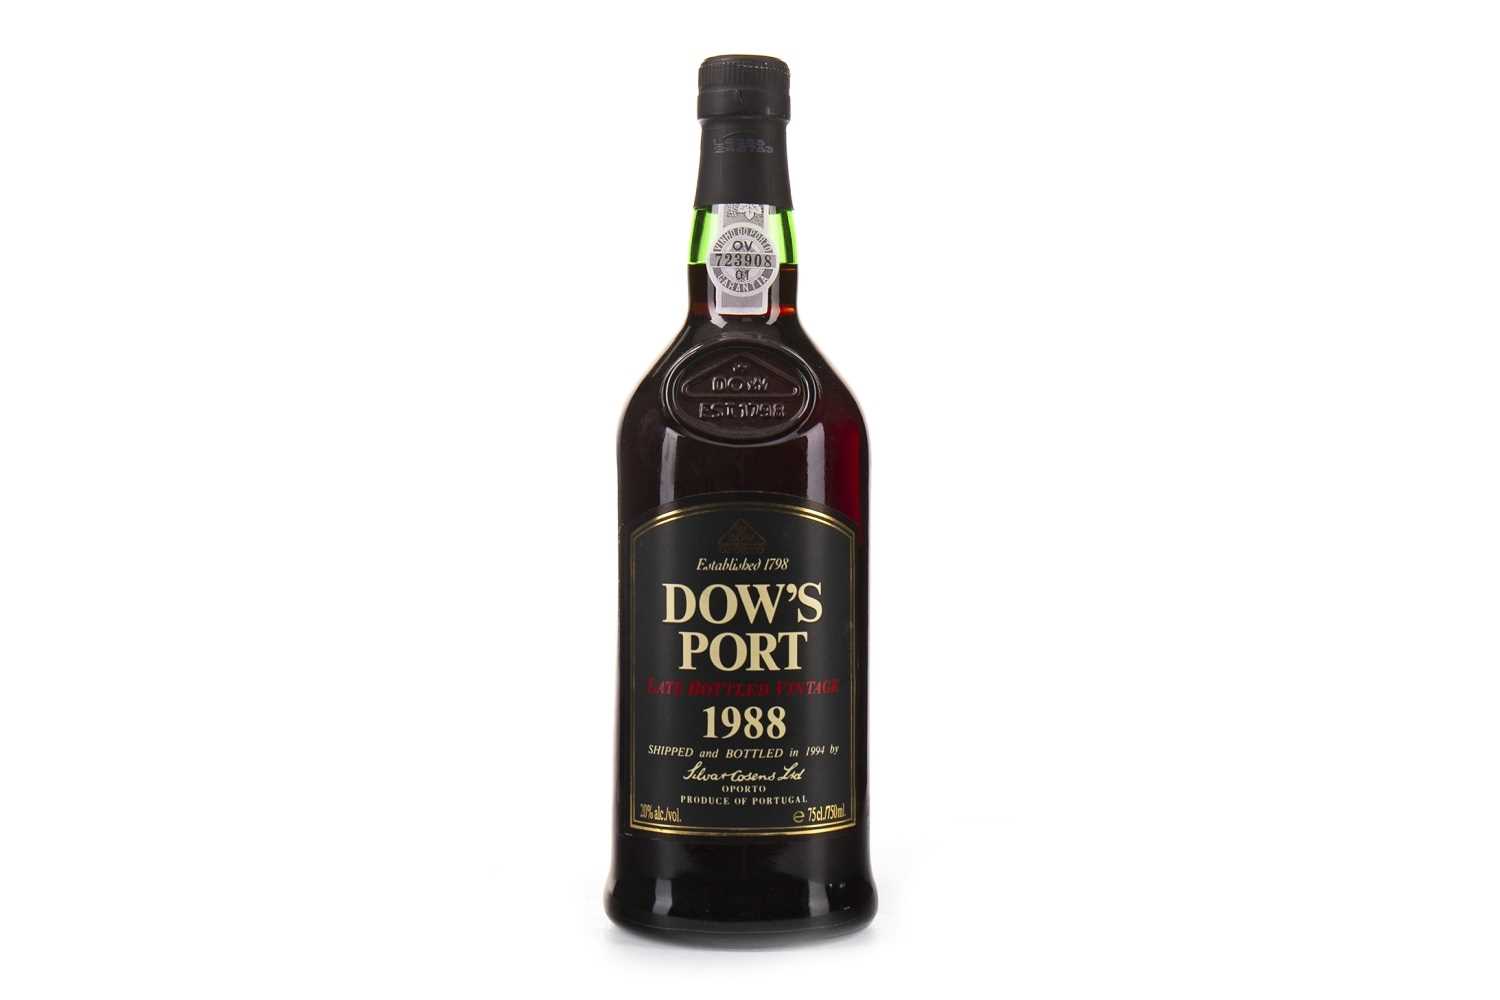 Lot 2027 - DOW'S LATE BOTTLED VINTAGE 1988